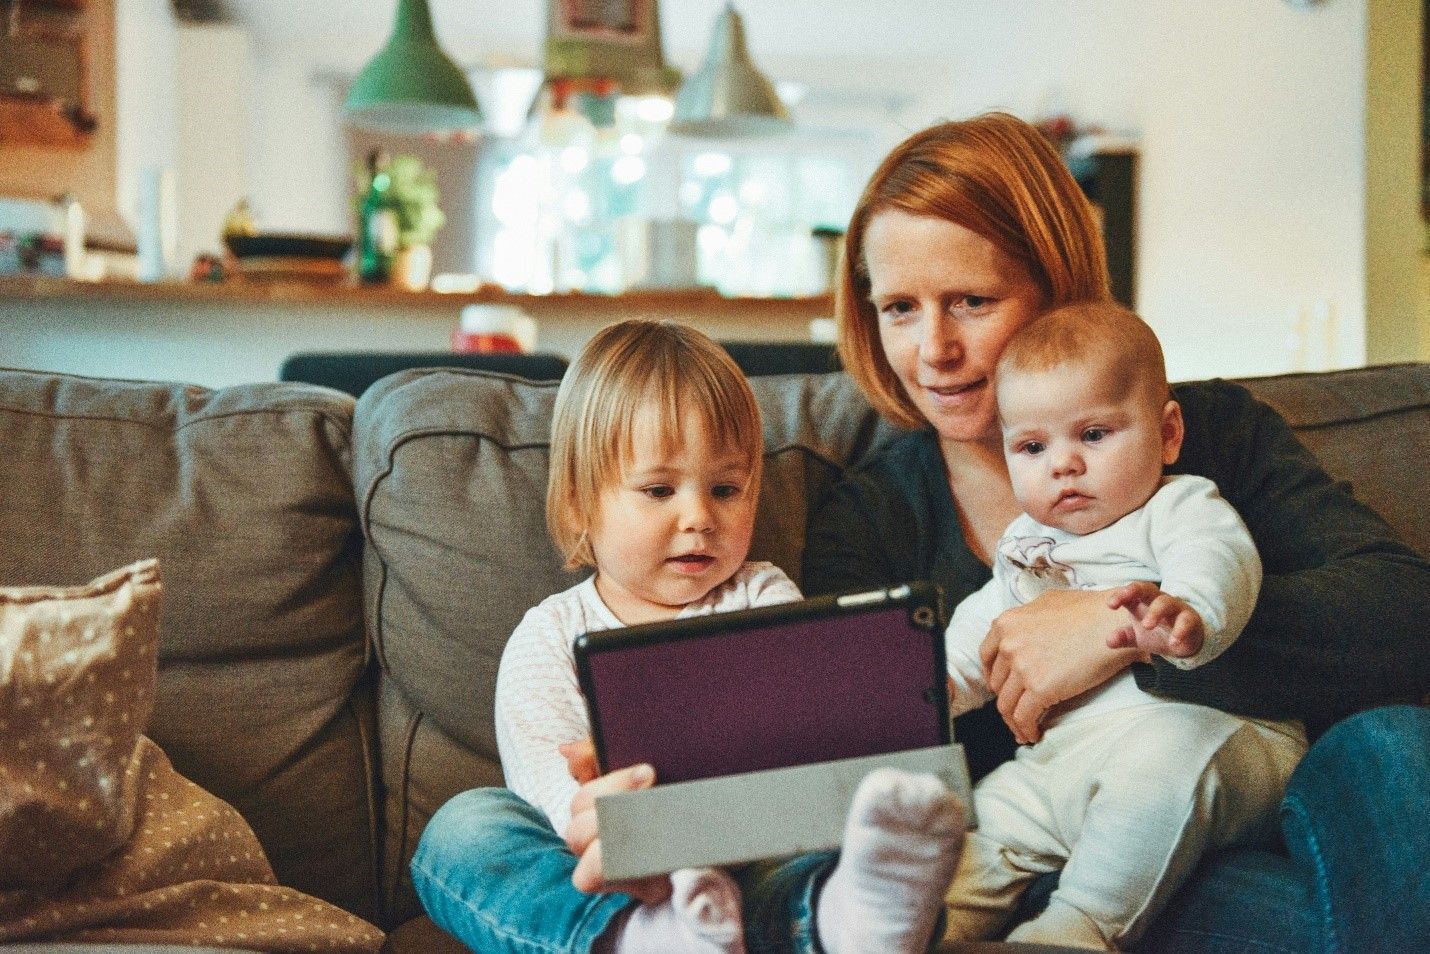 A woman is sitting on a couch holding two children and looking at a tablet.